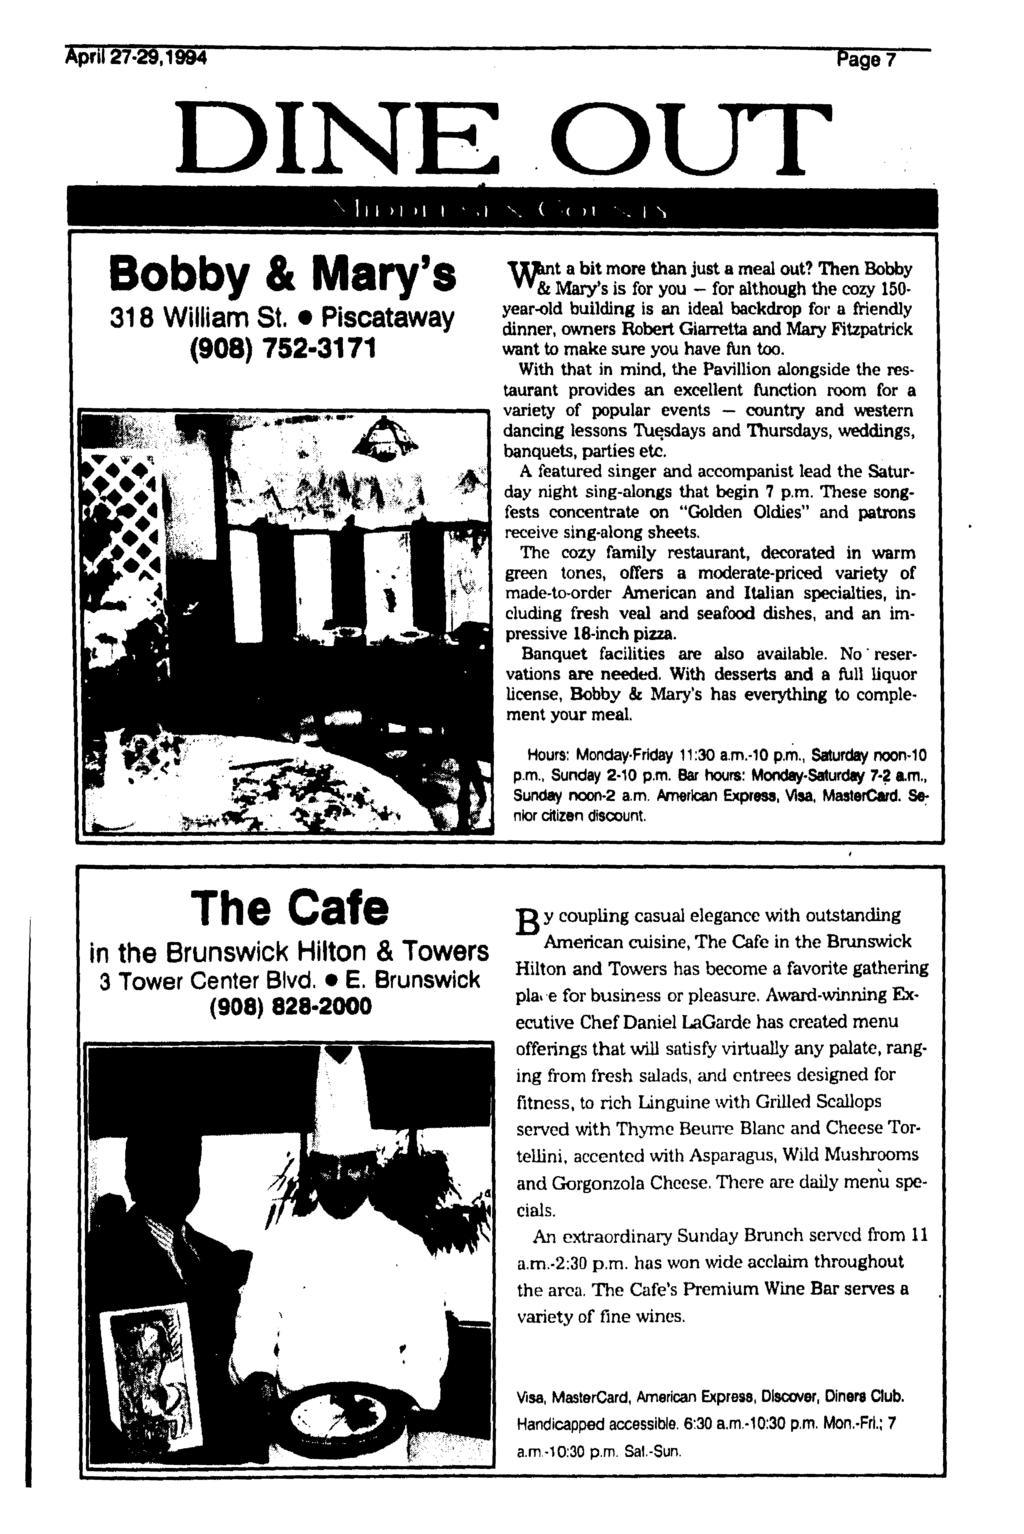 April 27-29,1994 Page 7 DINE OUT 1 I I > 1 M I,1 N Bobby & Mary's 318 William St. Piscataway (908) 752-3171 TXl&nt a bit more than just a meal out?